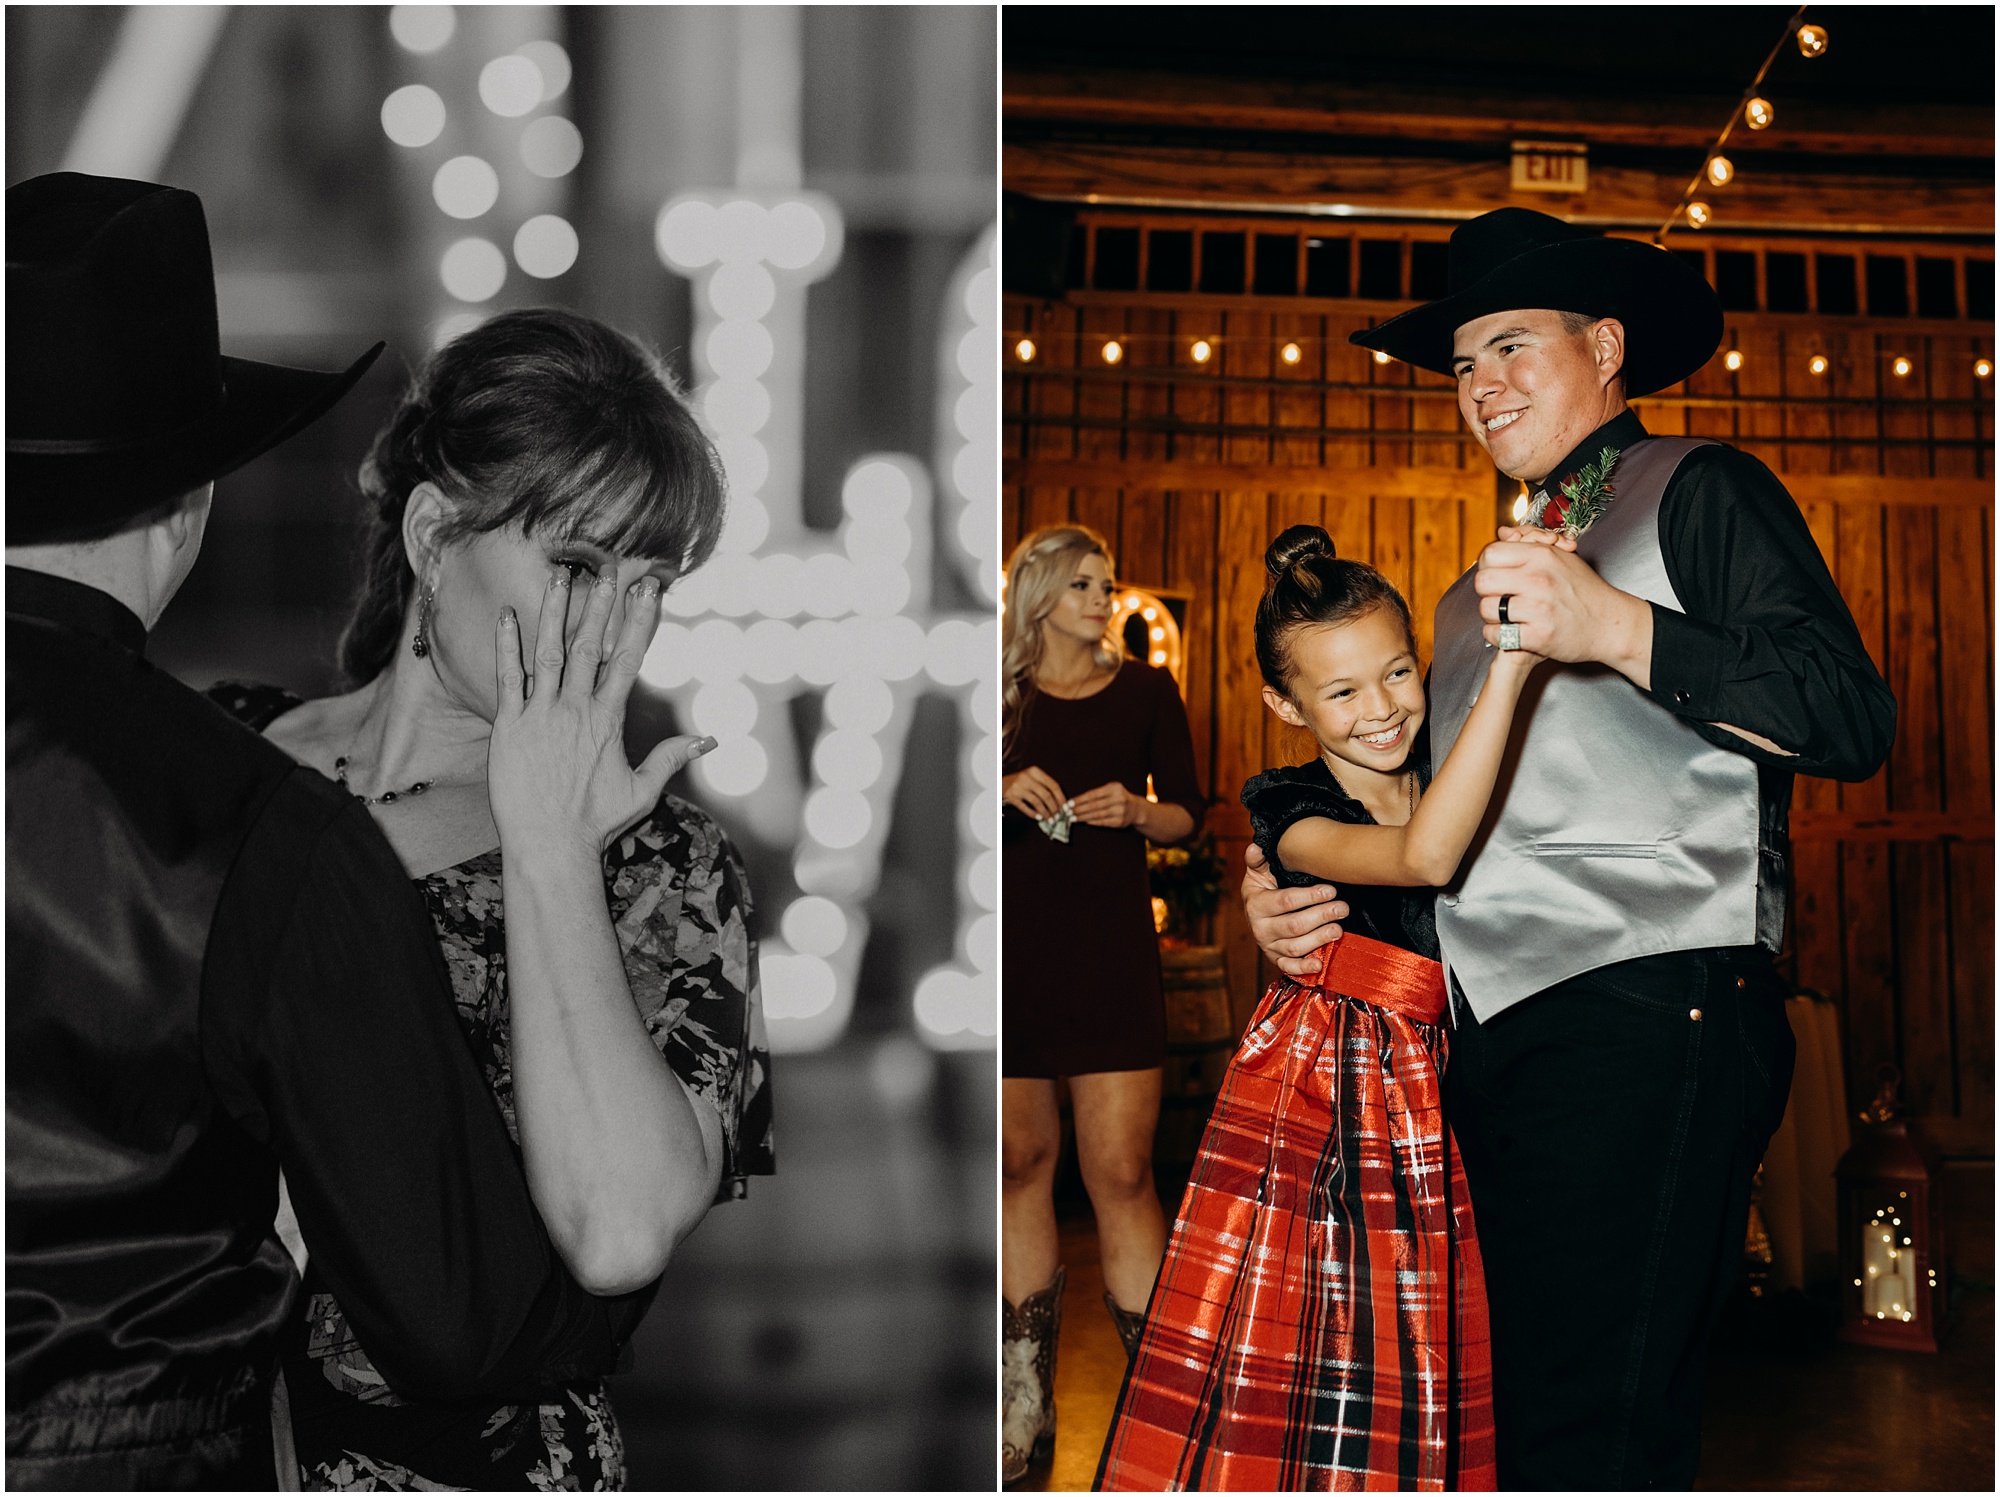 Groom has an emotional dance with his mother during a barn reception for a Country Christmas wedding.